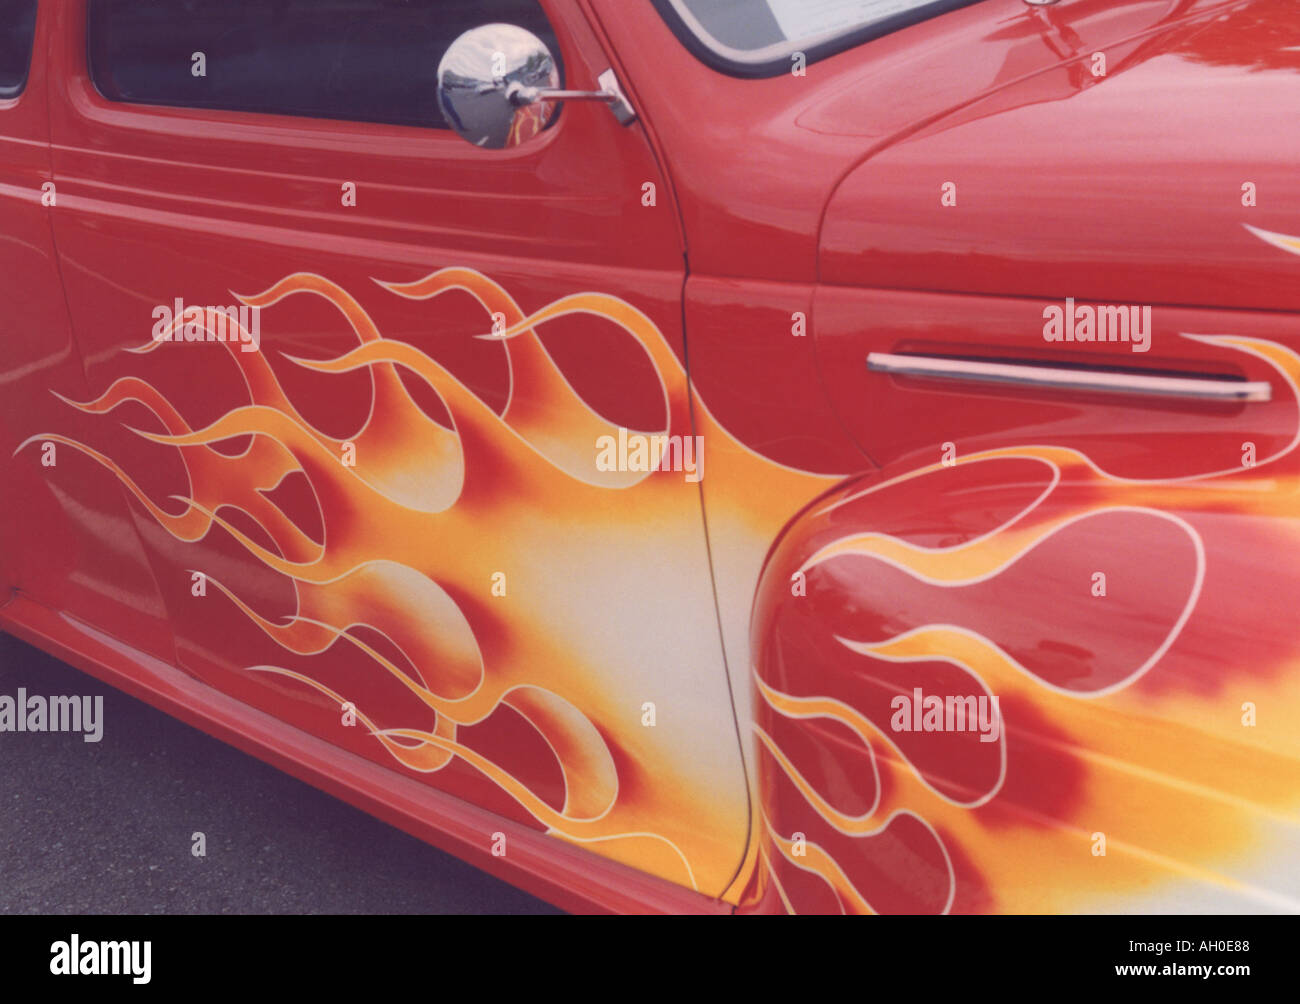 1947 Chevy Coupe with flame graphics on the side panel. Stock Photo